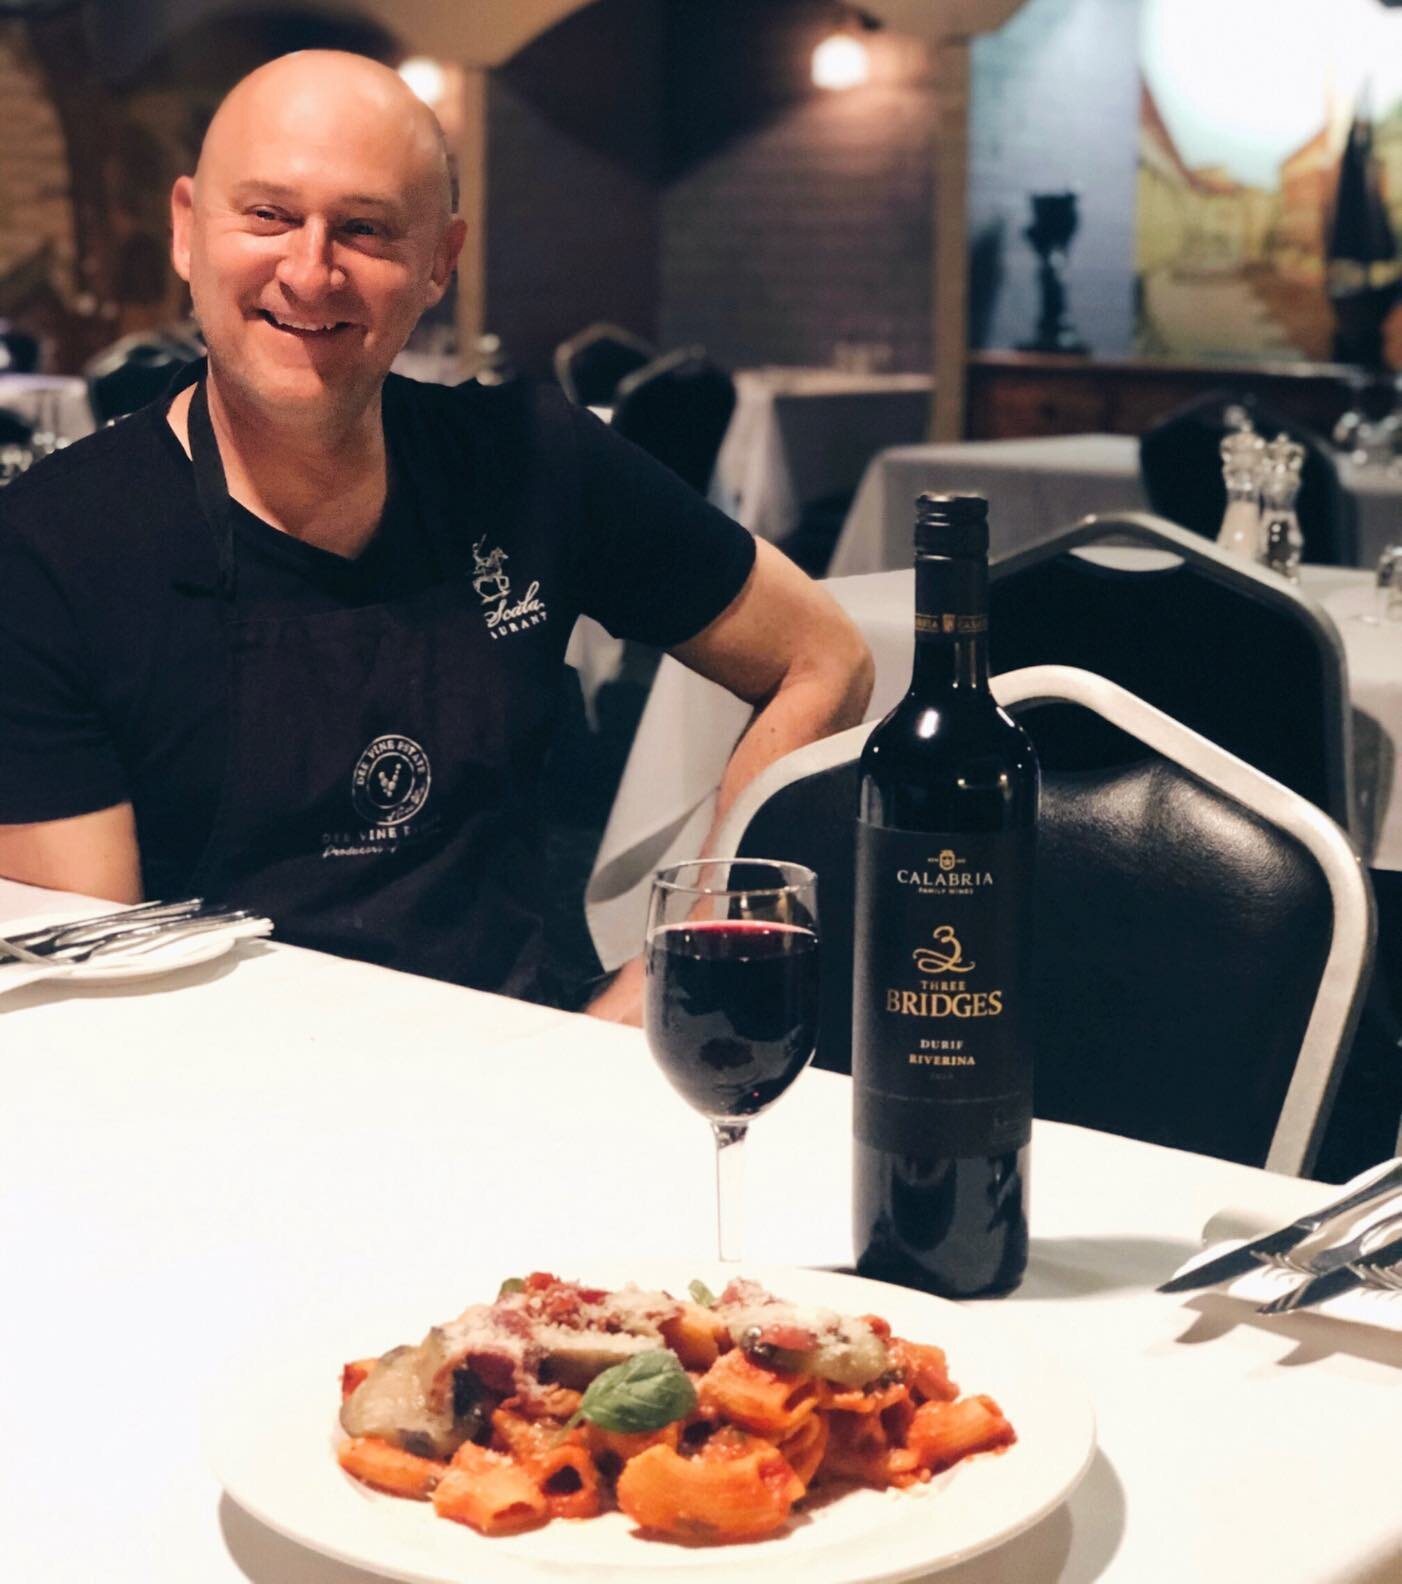 Renato and the staff at La Scala are excited to resume our normal trading hours &bull;Tuesday-Saturday from 6pm&bull;
We welcome customers back to dine in and enjoy a night out with us, call to make a reservation so you don&rsquo;t miss out. 🍷🍝
Tak